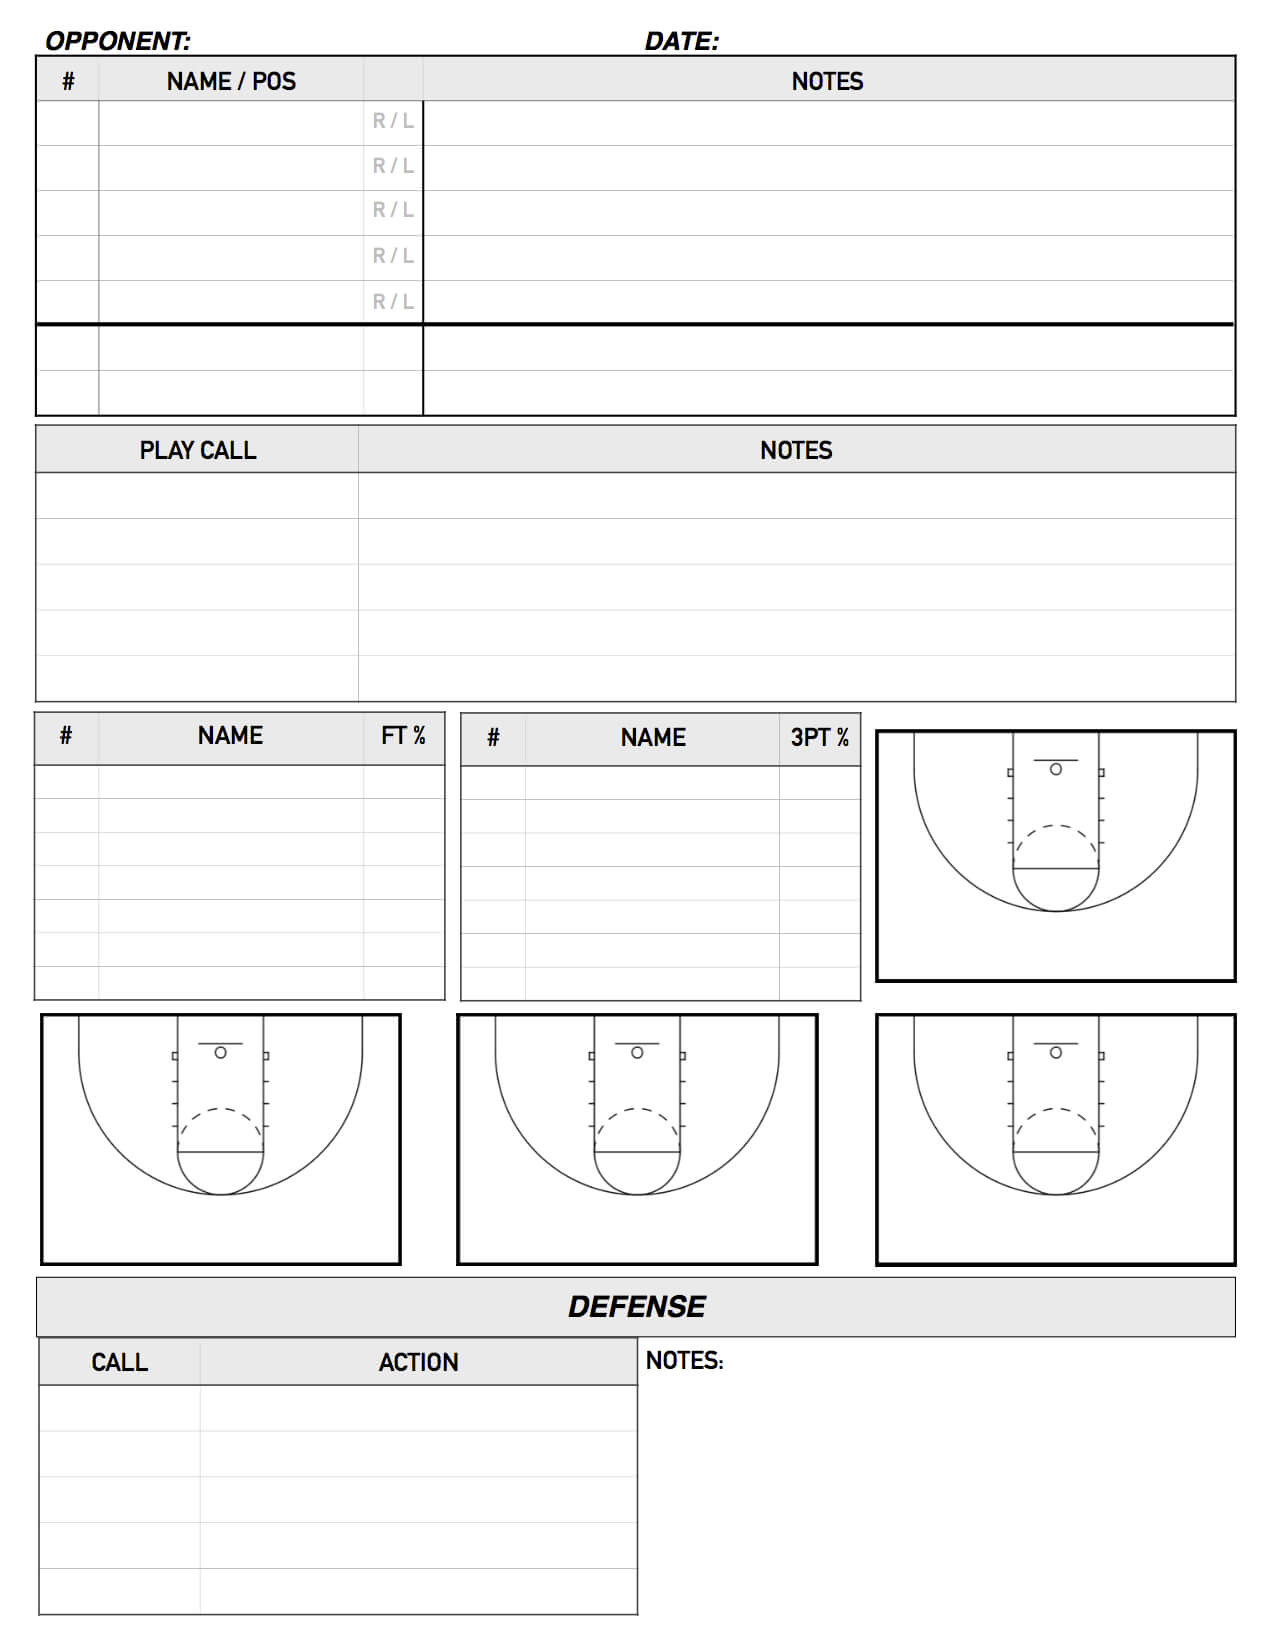 Report Examples College Basketball Scouting Template Team Pertaining To Basketball Player Scouting Report Template